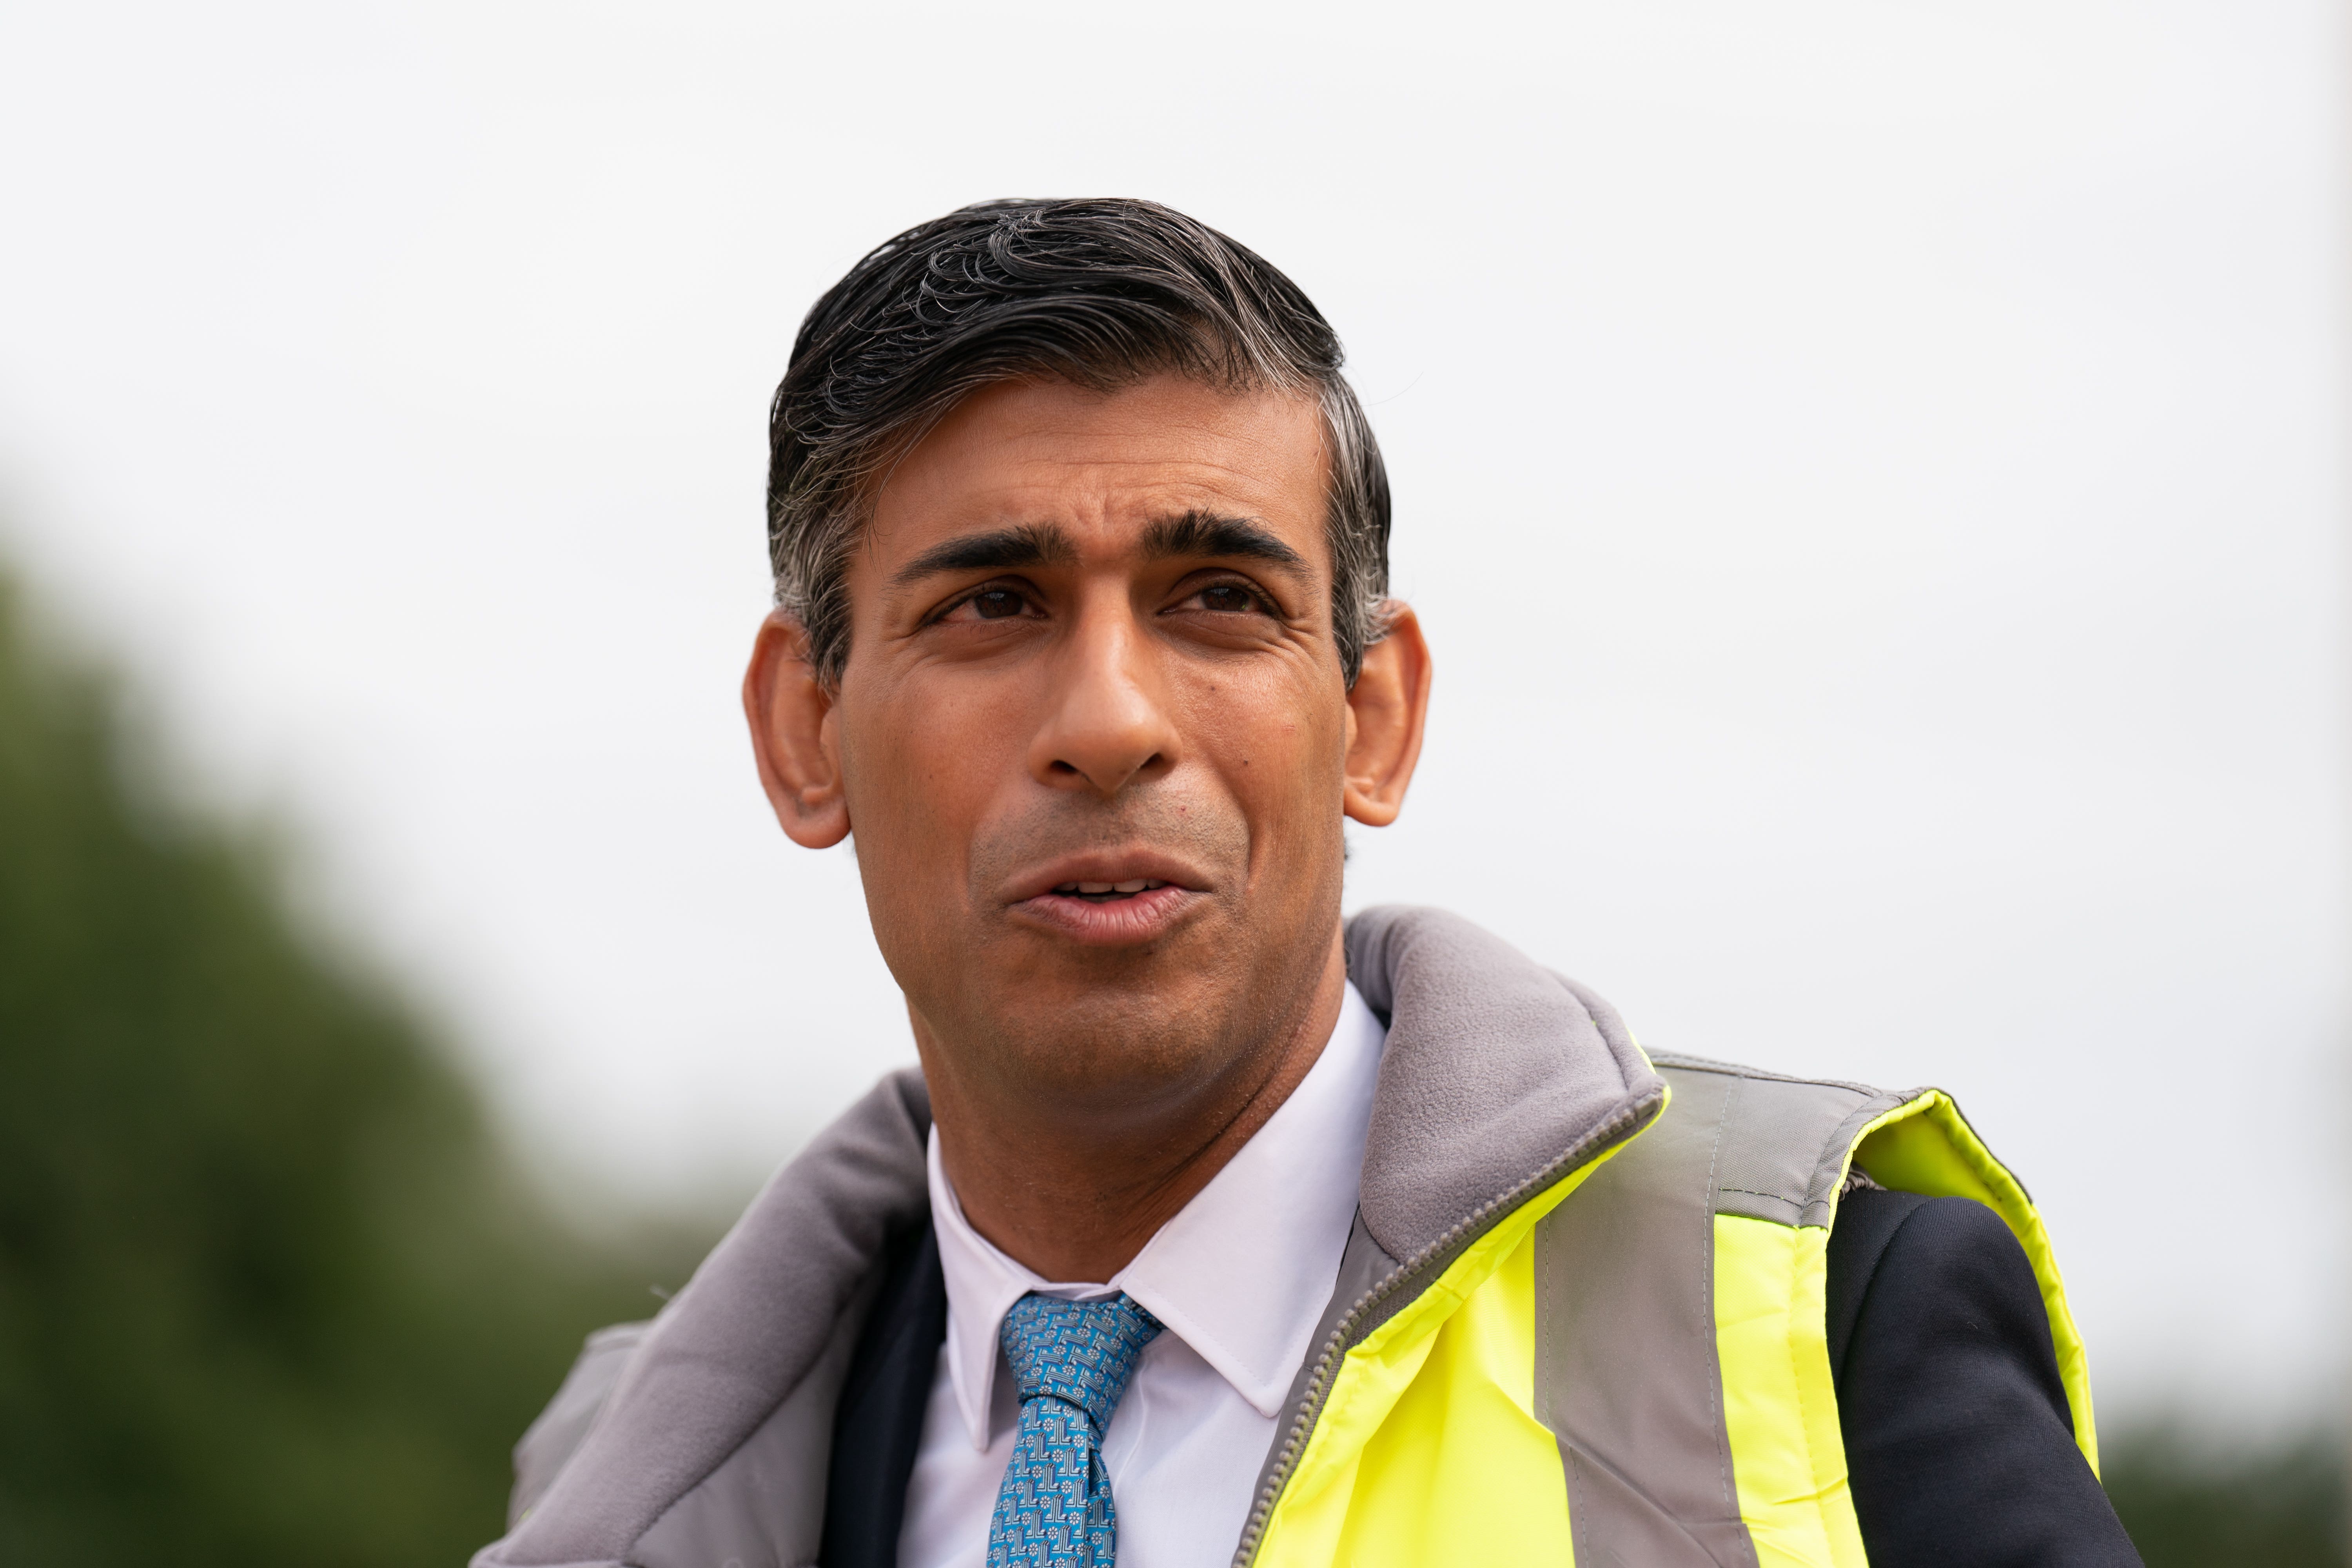 Rishi Sunak has denied claims he cut plans to build more new schools